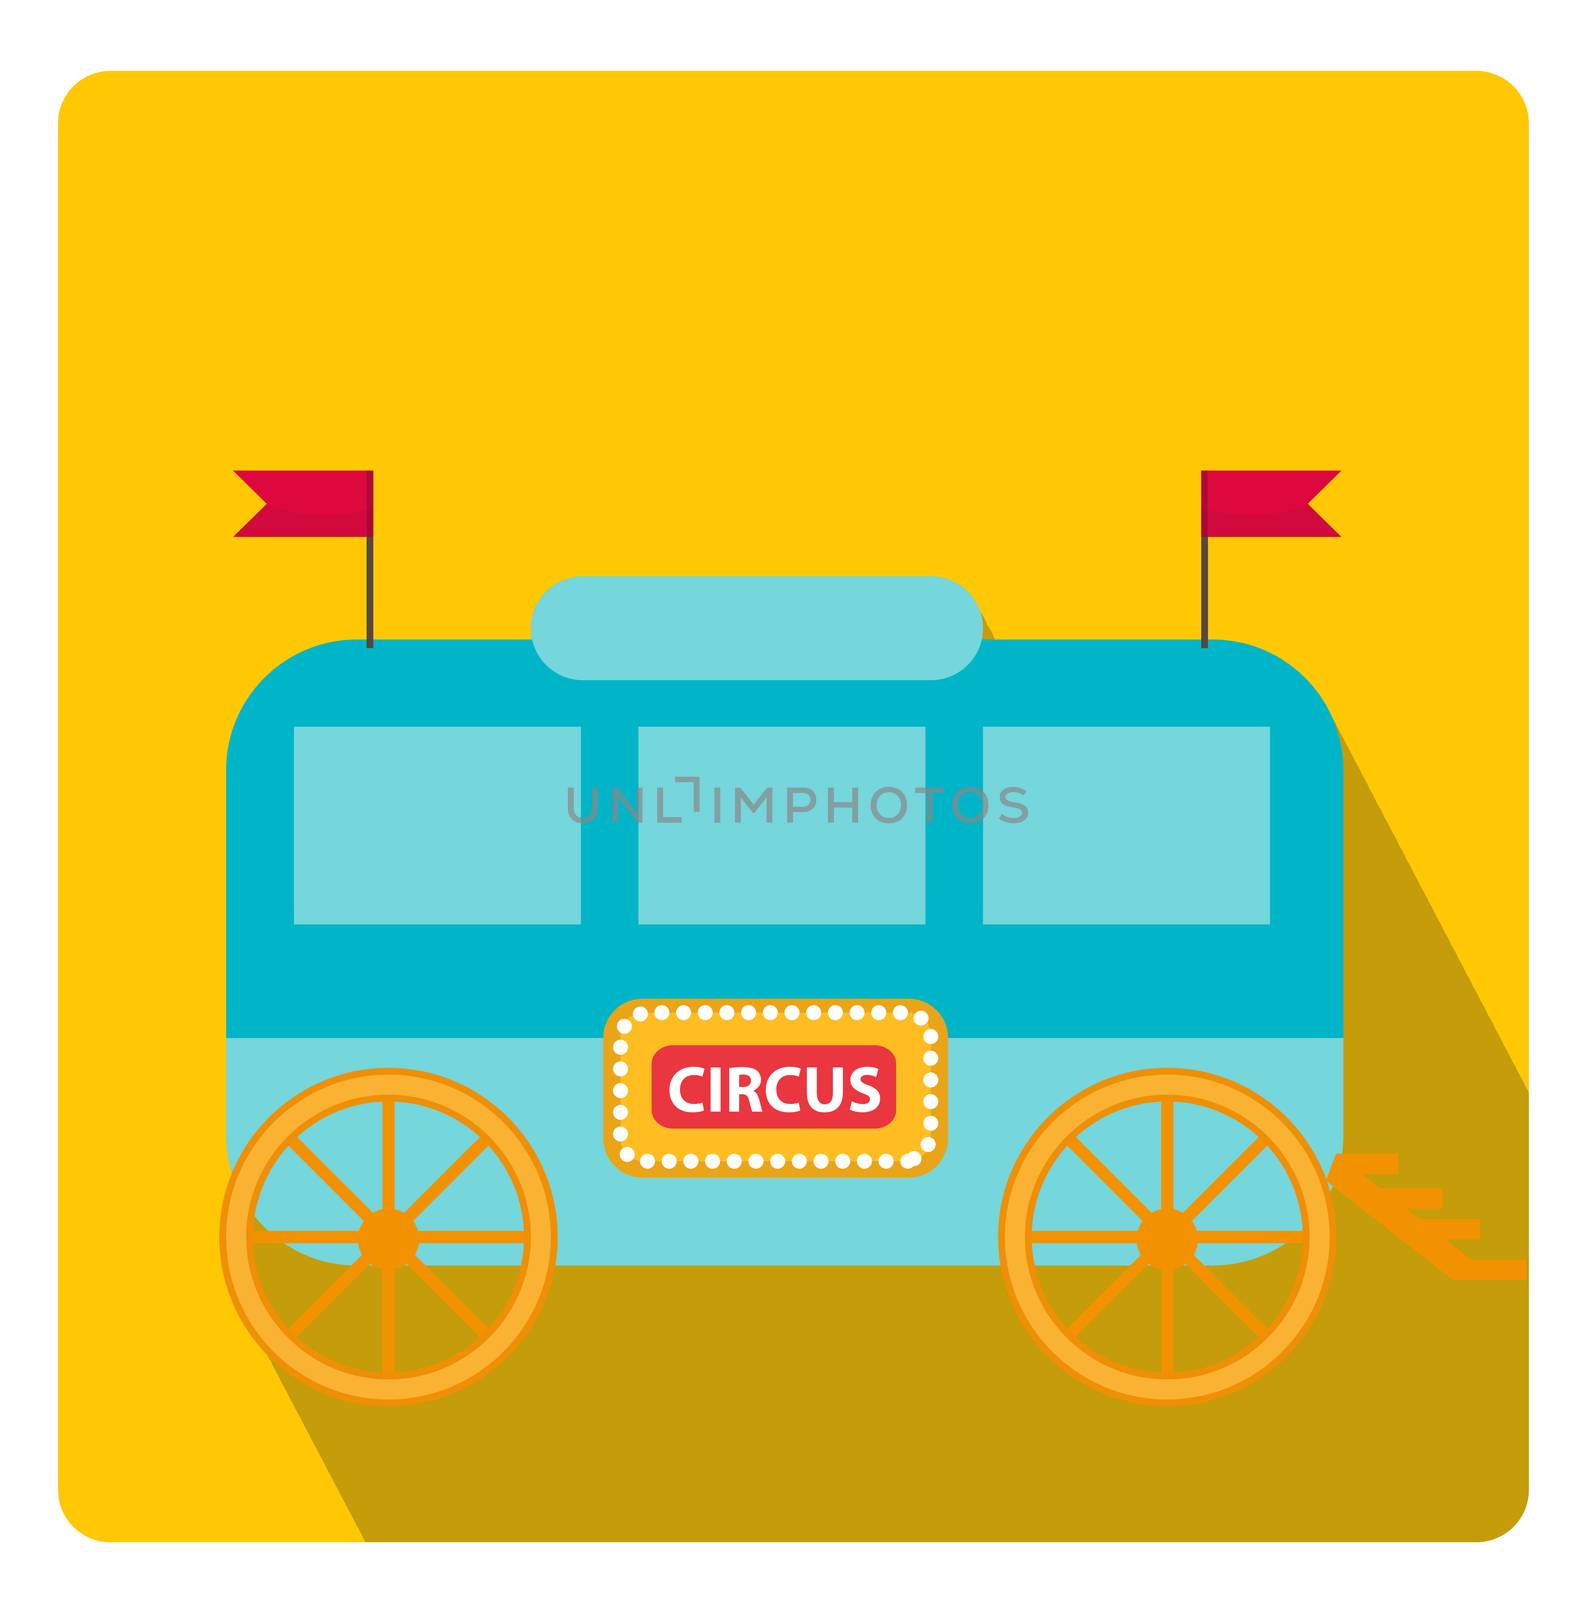 Circus trailer, wagon icon flat style with long shadows, isolated on white background. illustration